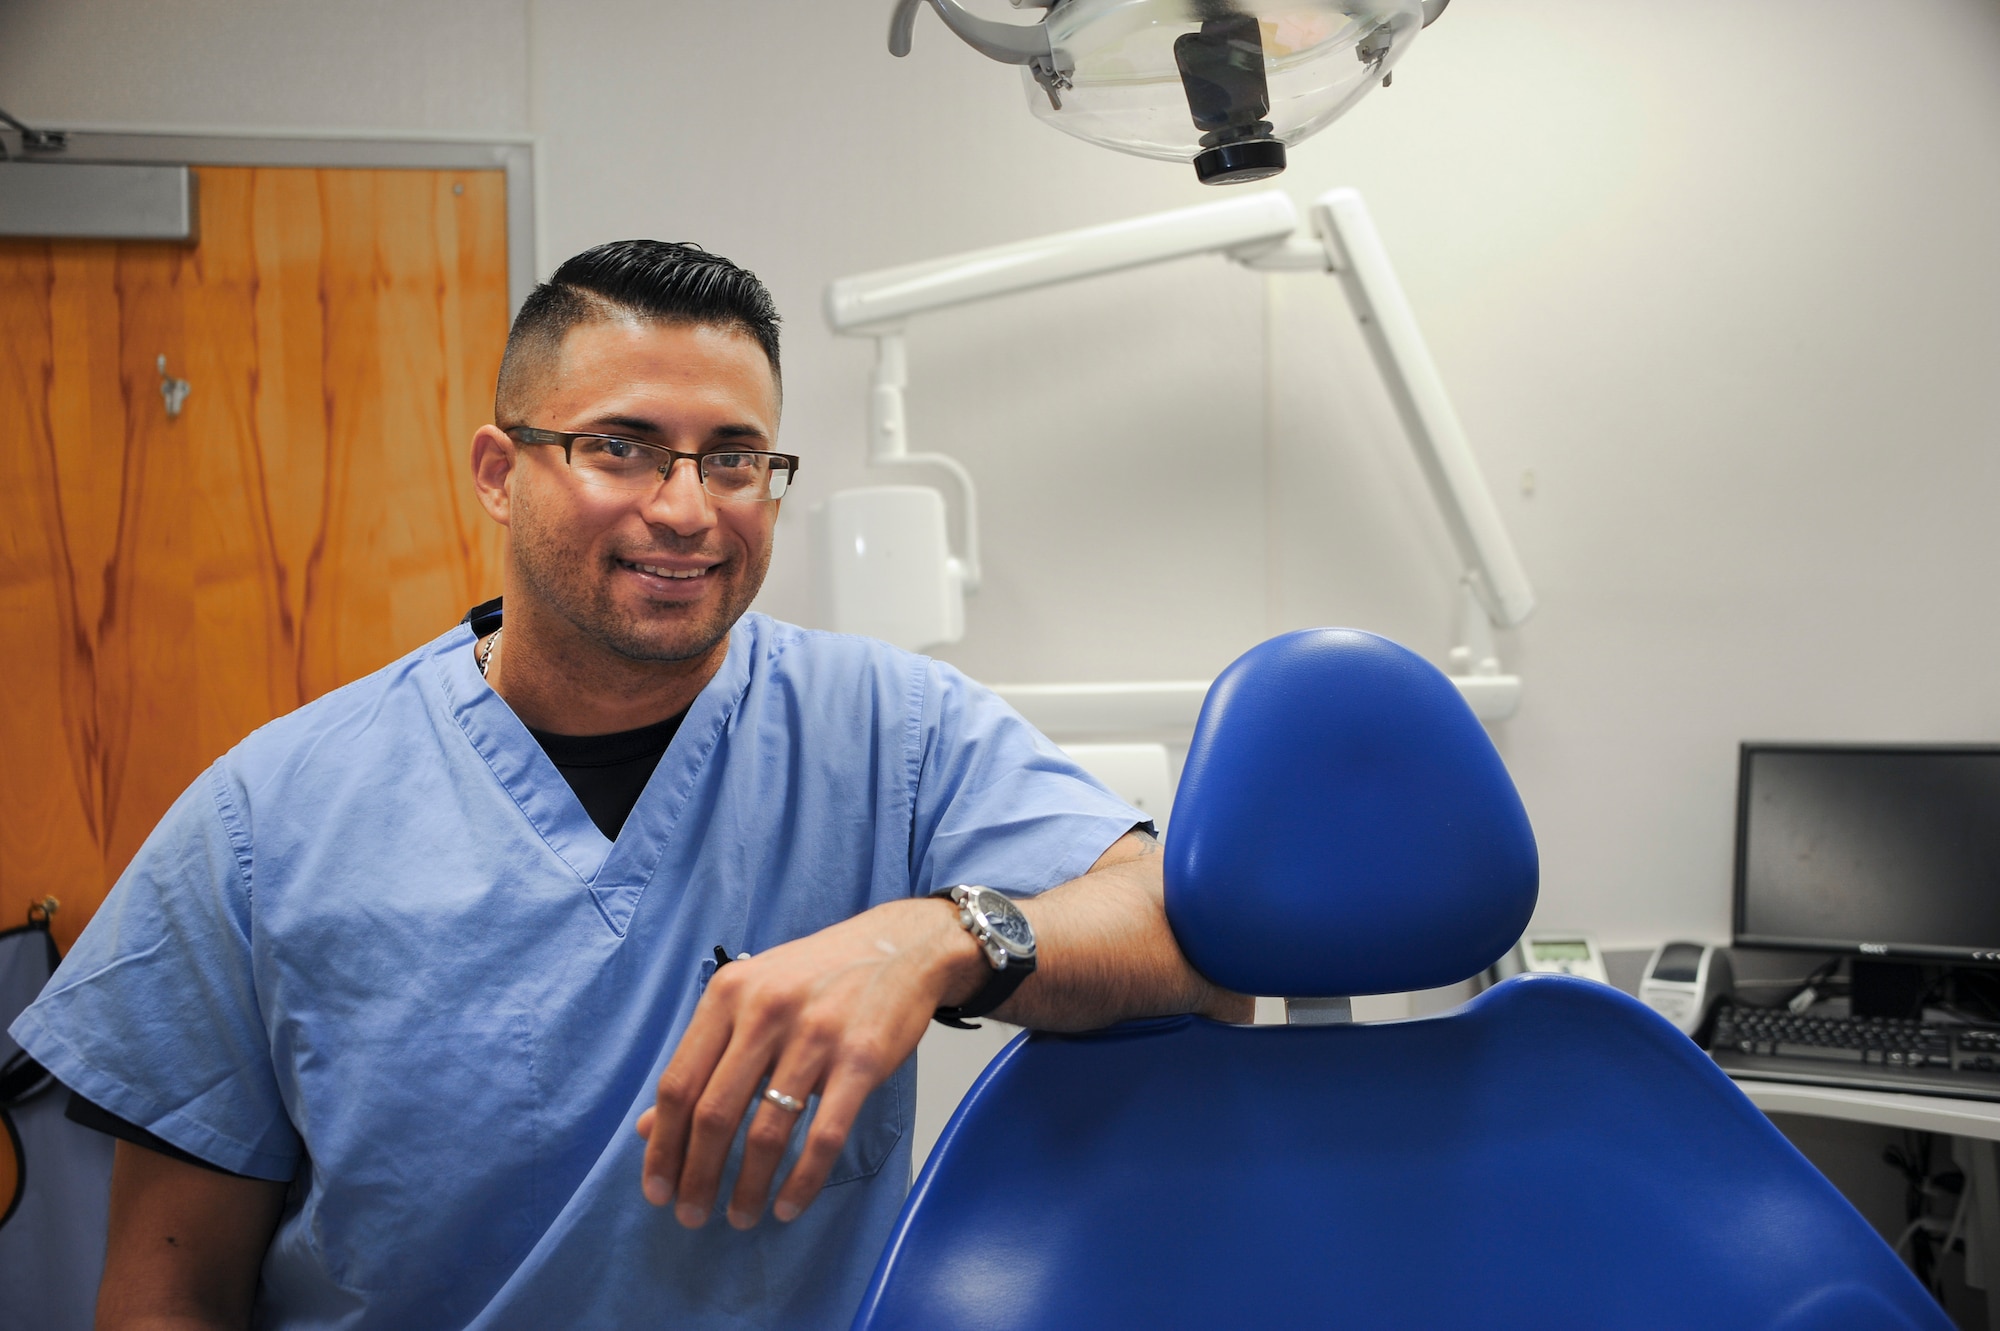 Ivan Grijalva, 355th Dental Squadron dental assistant, stands in an examination room at the dental clinic of Davis-Monthan Air Force Base, Feb. 11, 2016. Grijalva kept a motorcycle accident victim calm and awake after applying a tourniquet to the victim’s severed leg. (U.S. Air Force photo by Airman 1st Class Ashley N. Steffen/ Released)